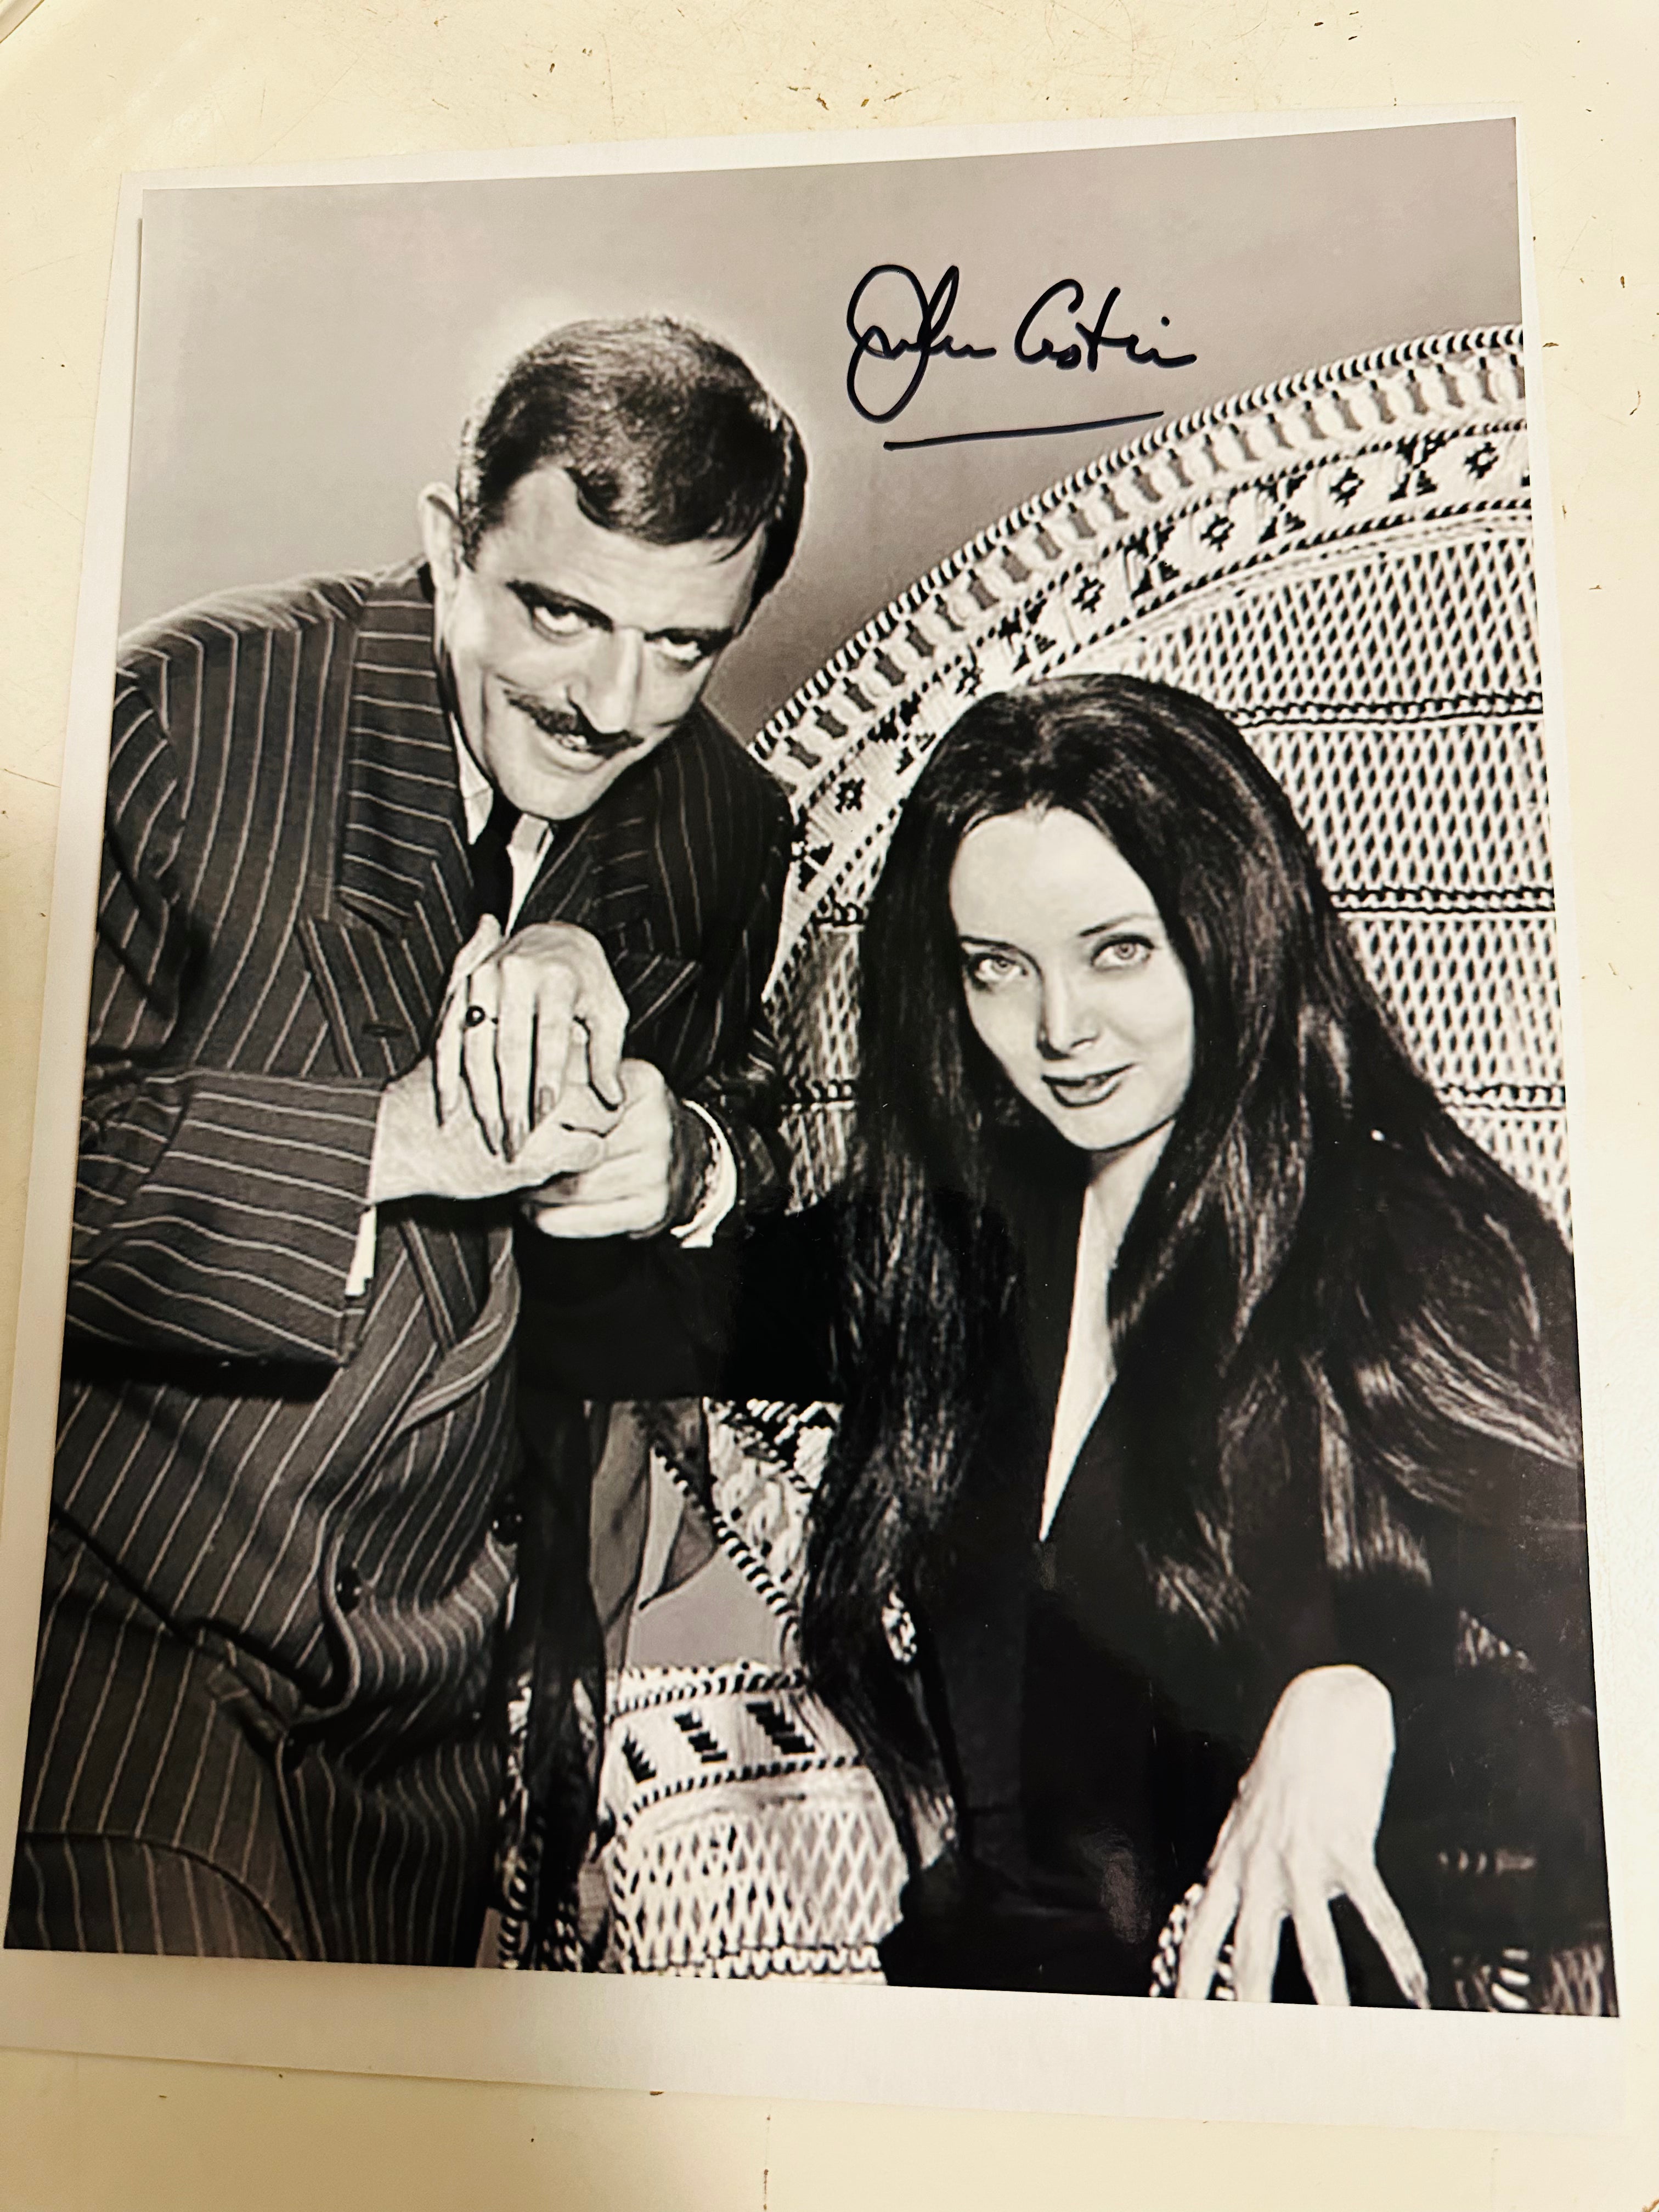 Addams Family rare John Astin autographed 8x10 photo certified by Fanexpo